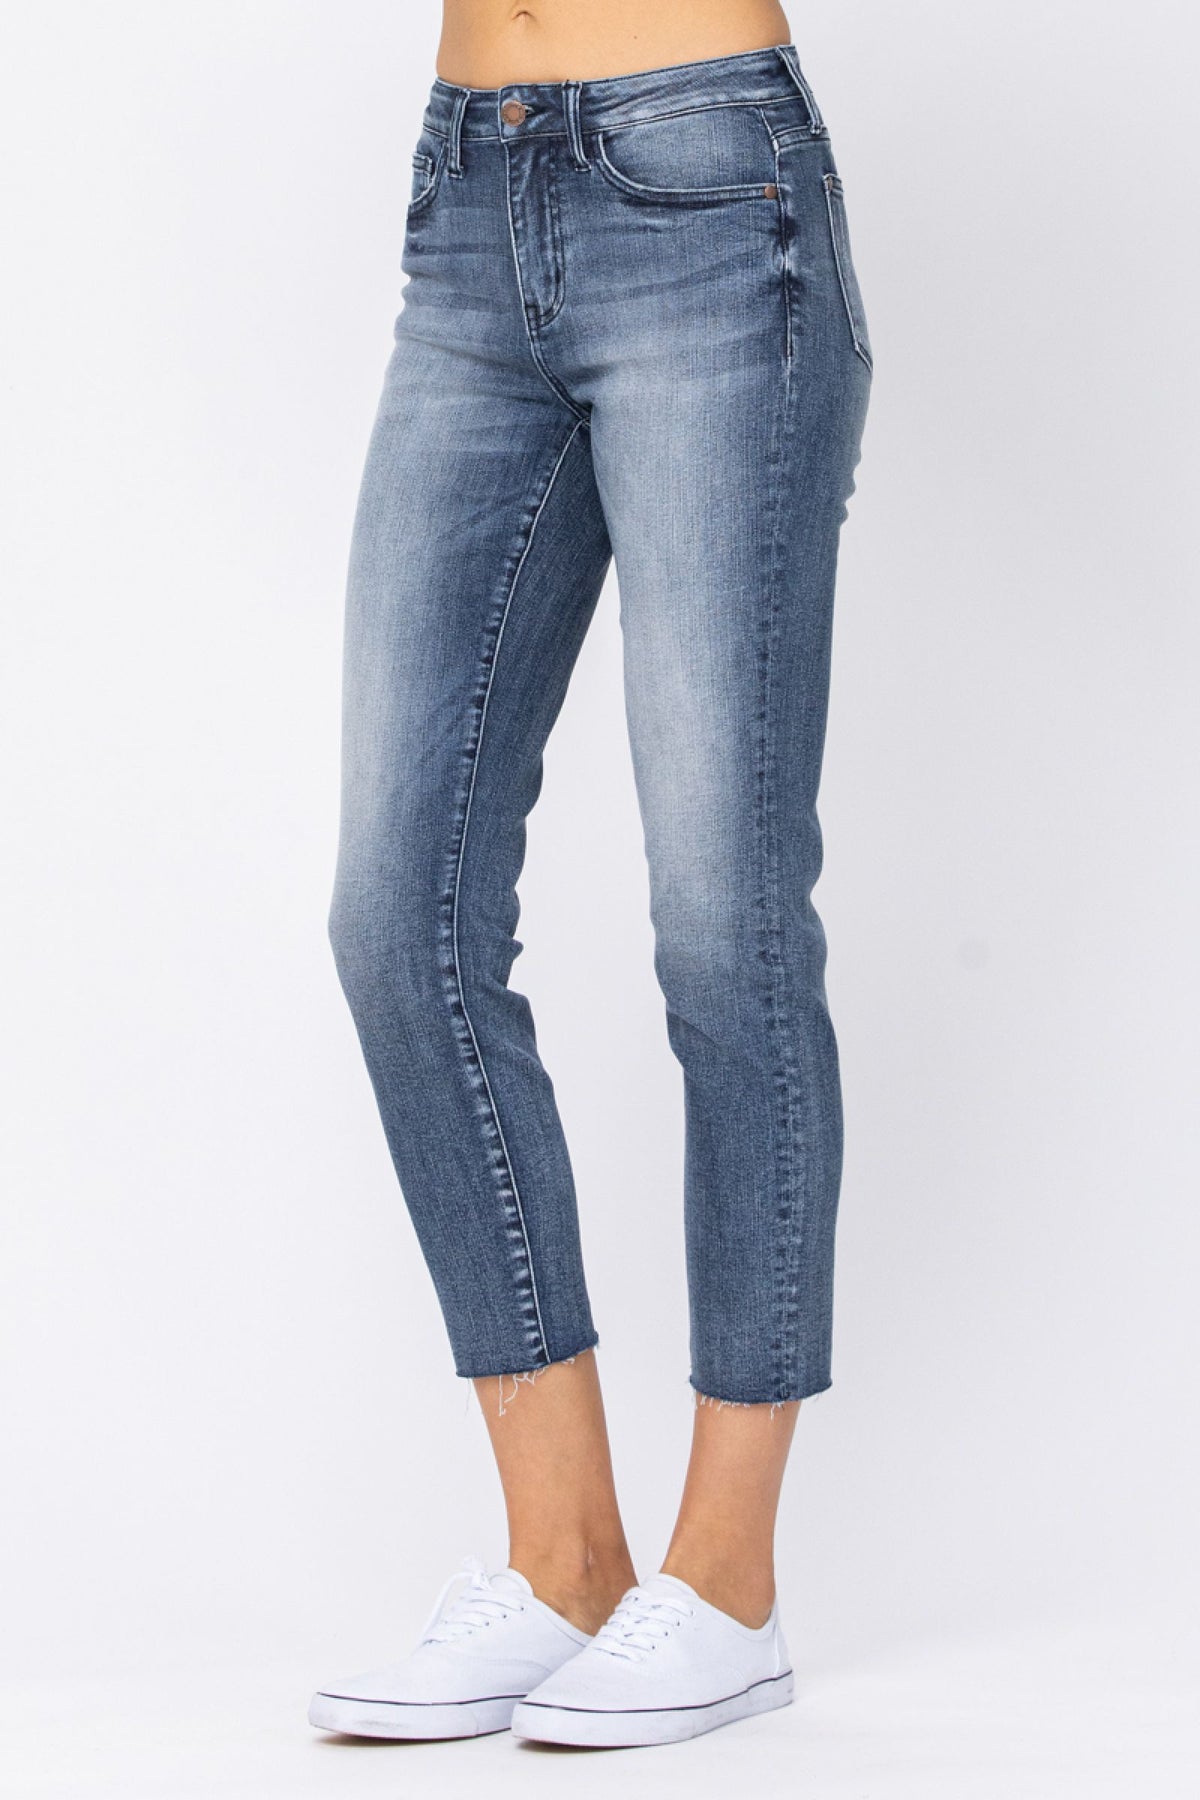 Judy Blue Relaxed Raw Hem Jeans